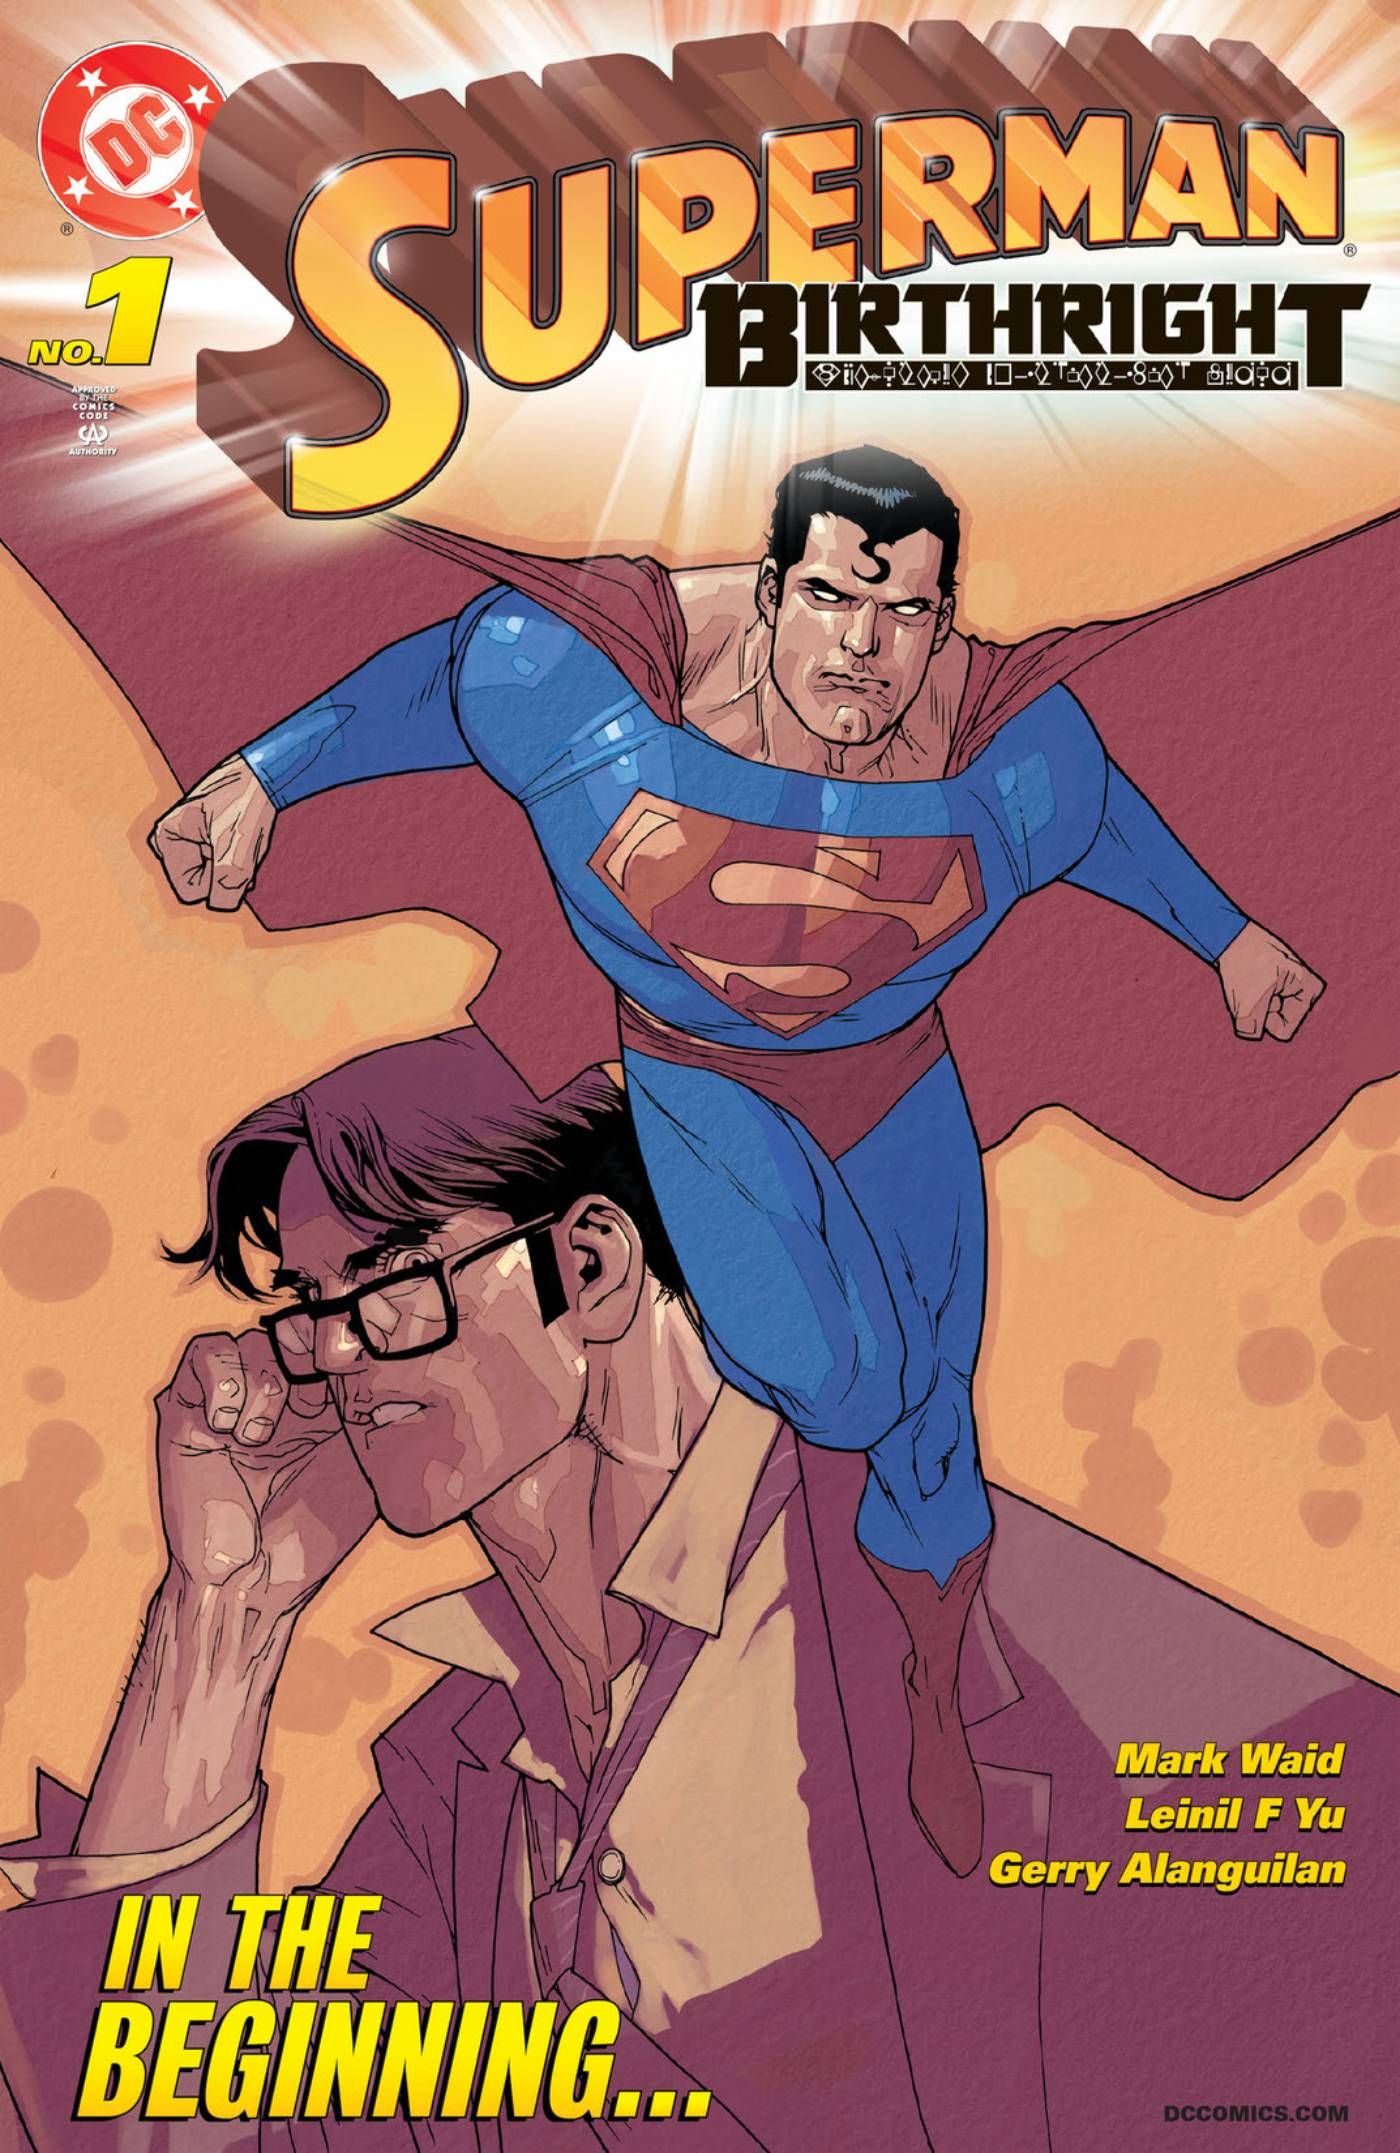 Mark Waid Teases His DC Black Label Series Is A Superman: Birthright Sequel